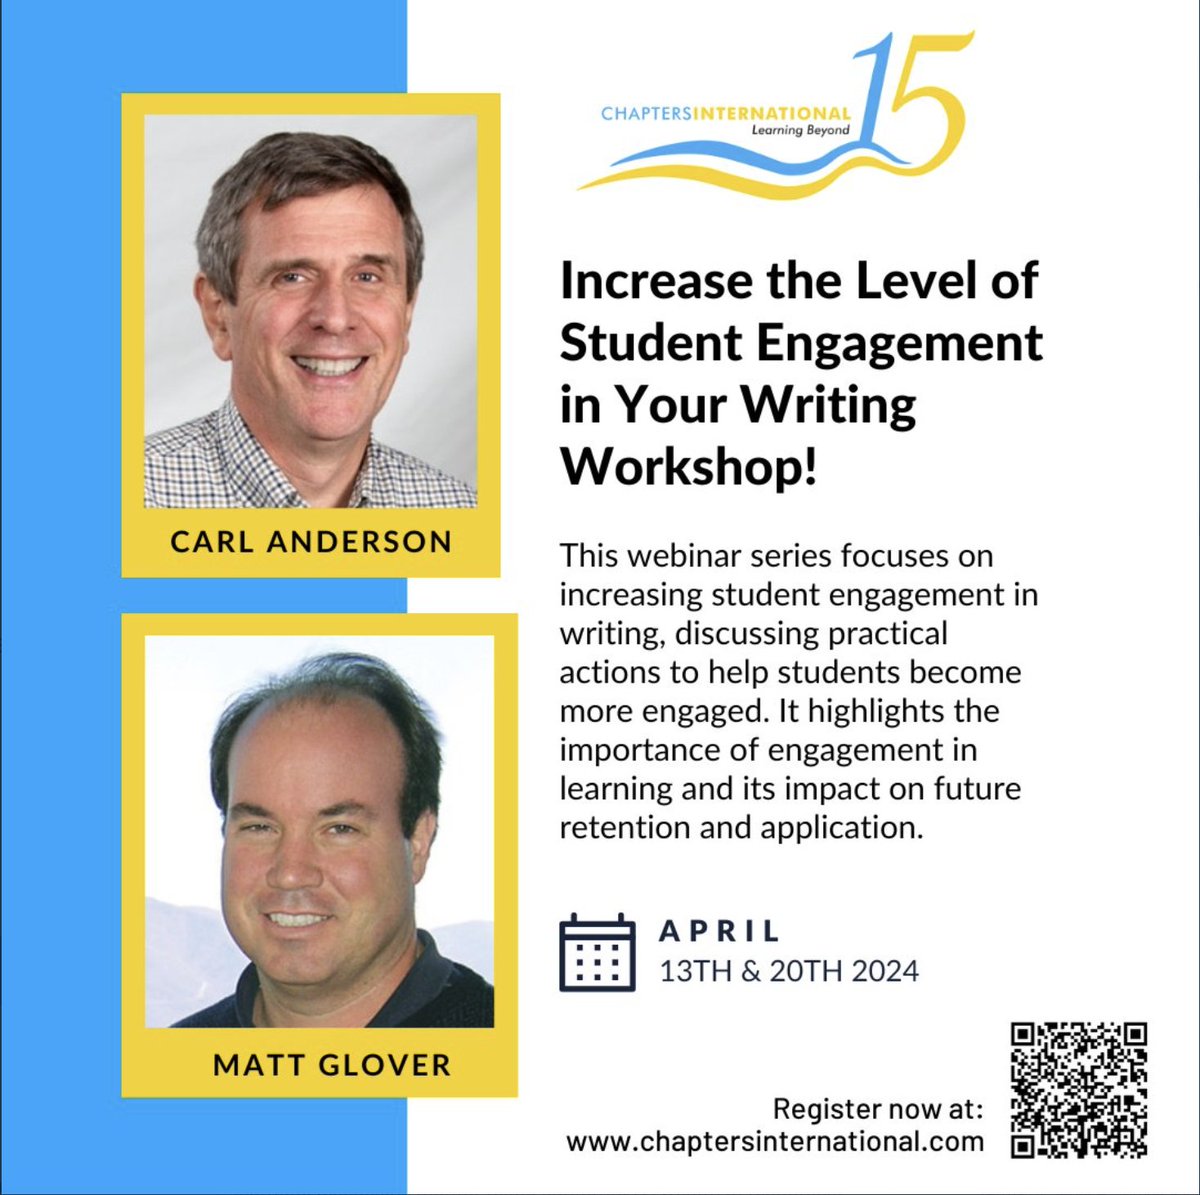 Want help with increasing student engagement in writing? @Mattglover123 and I are doing a webinar on this very topic April 13 & 20th with @ChaptersInt. Join us! Details: chaptersinternational.com/mailer/carl_ma…